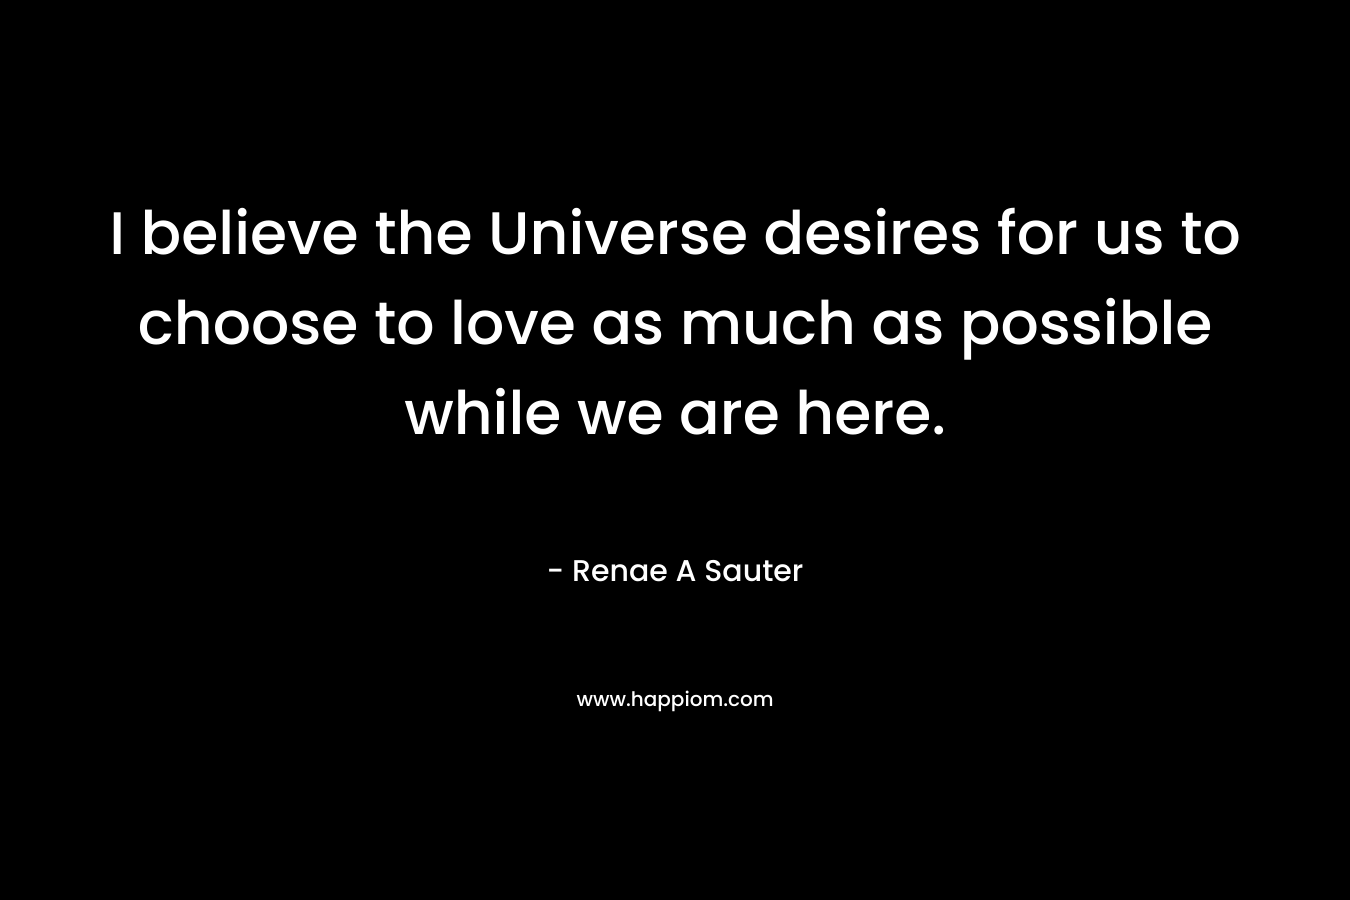 I believe the Universe desires for us to choose to love as much as possible while we are here.